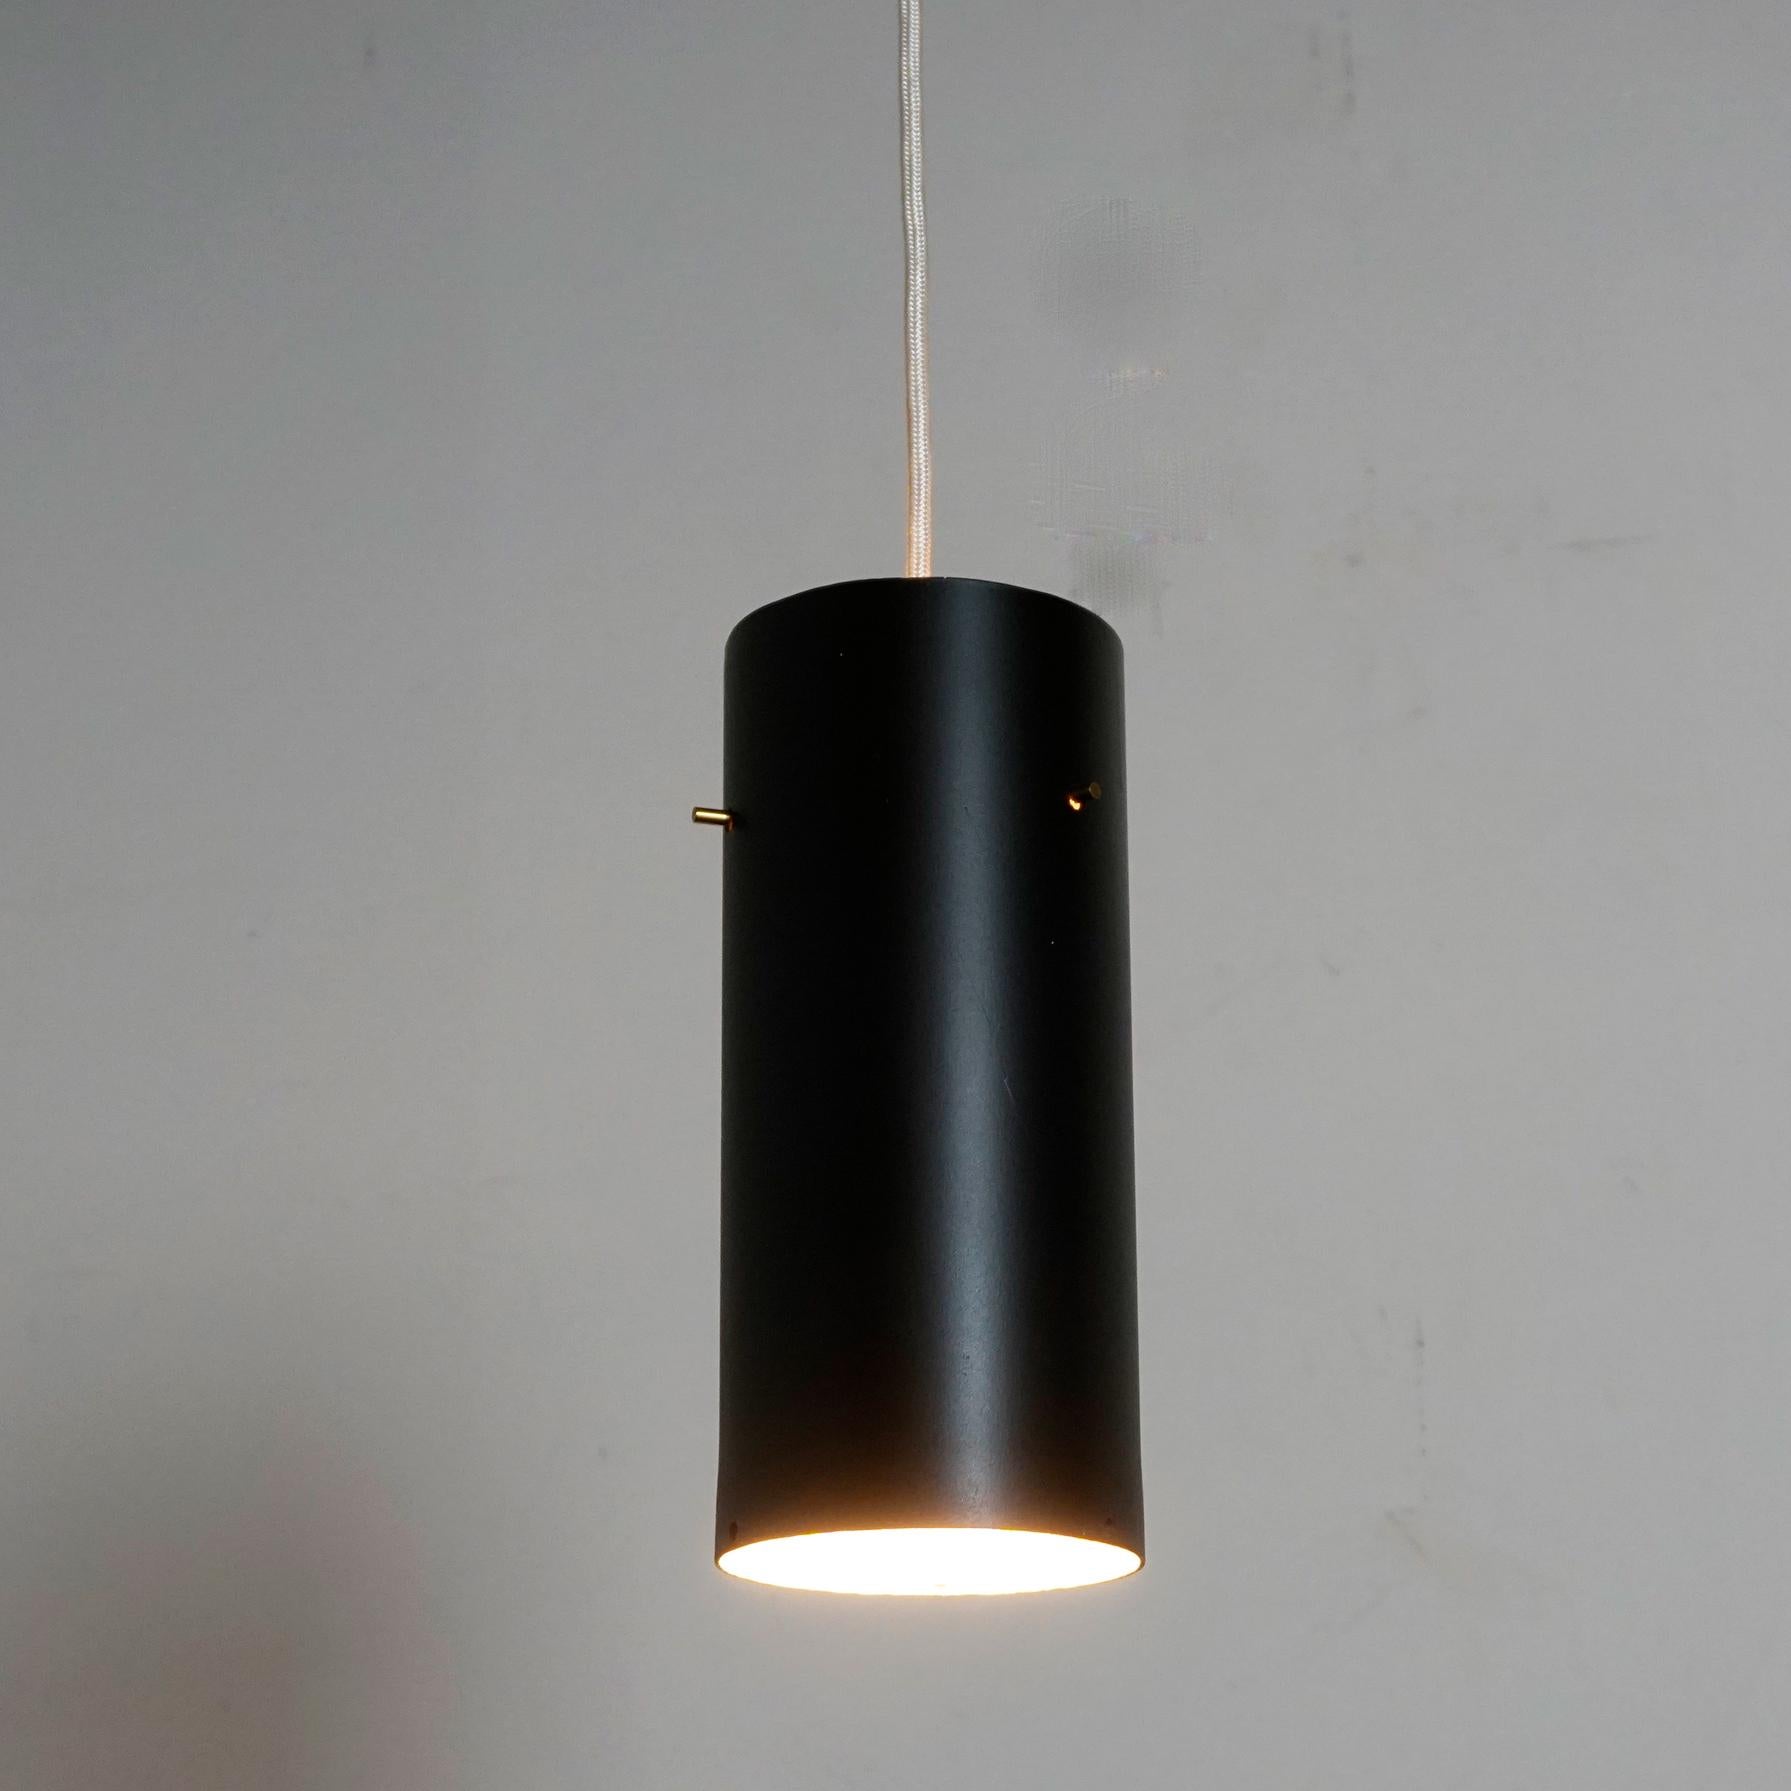 This beautiful zylindrical shaped pendant lamp was designed and manufactured by J. T. Kalmar Vienna in the 1960s. It features a black lacquered shade with white interior and one E 27 light socket and small brass details.
It´s clear and puristic